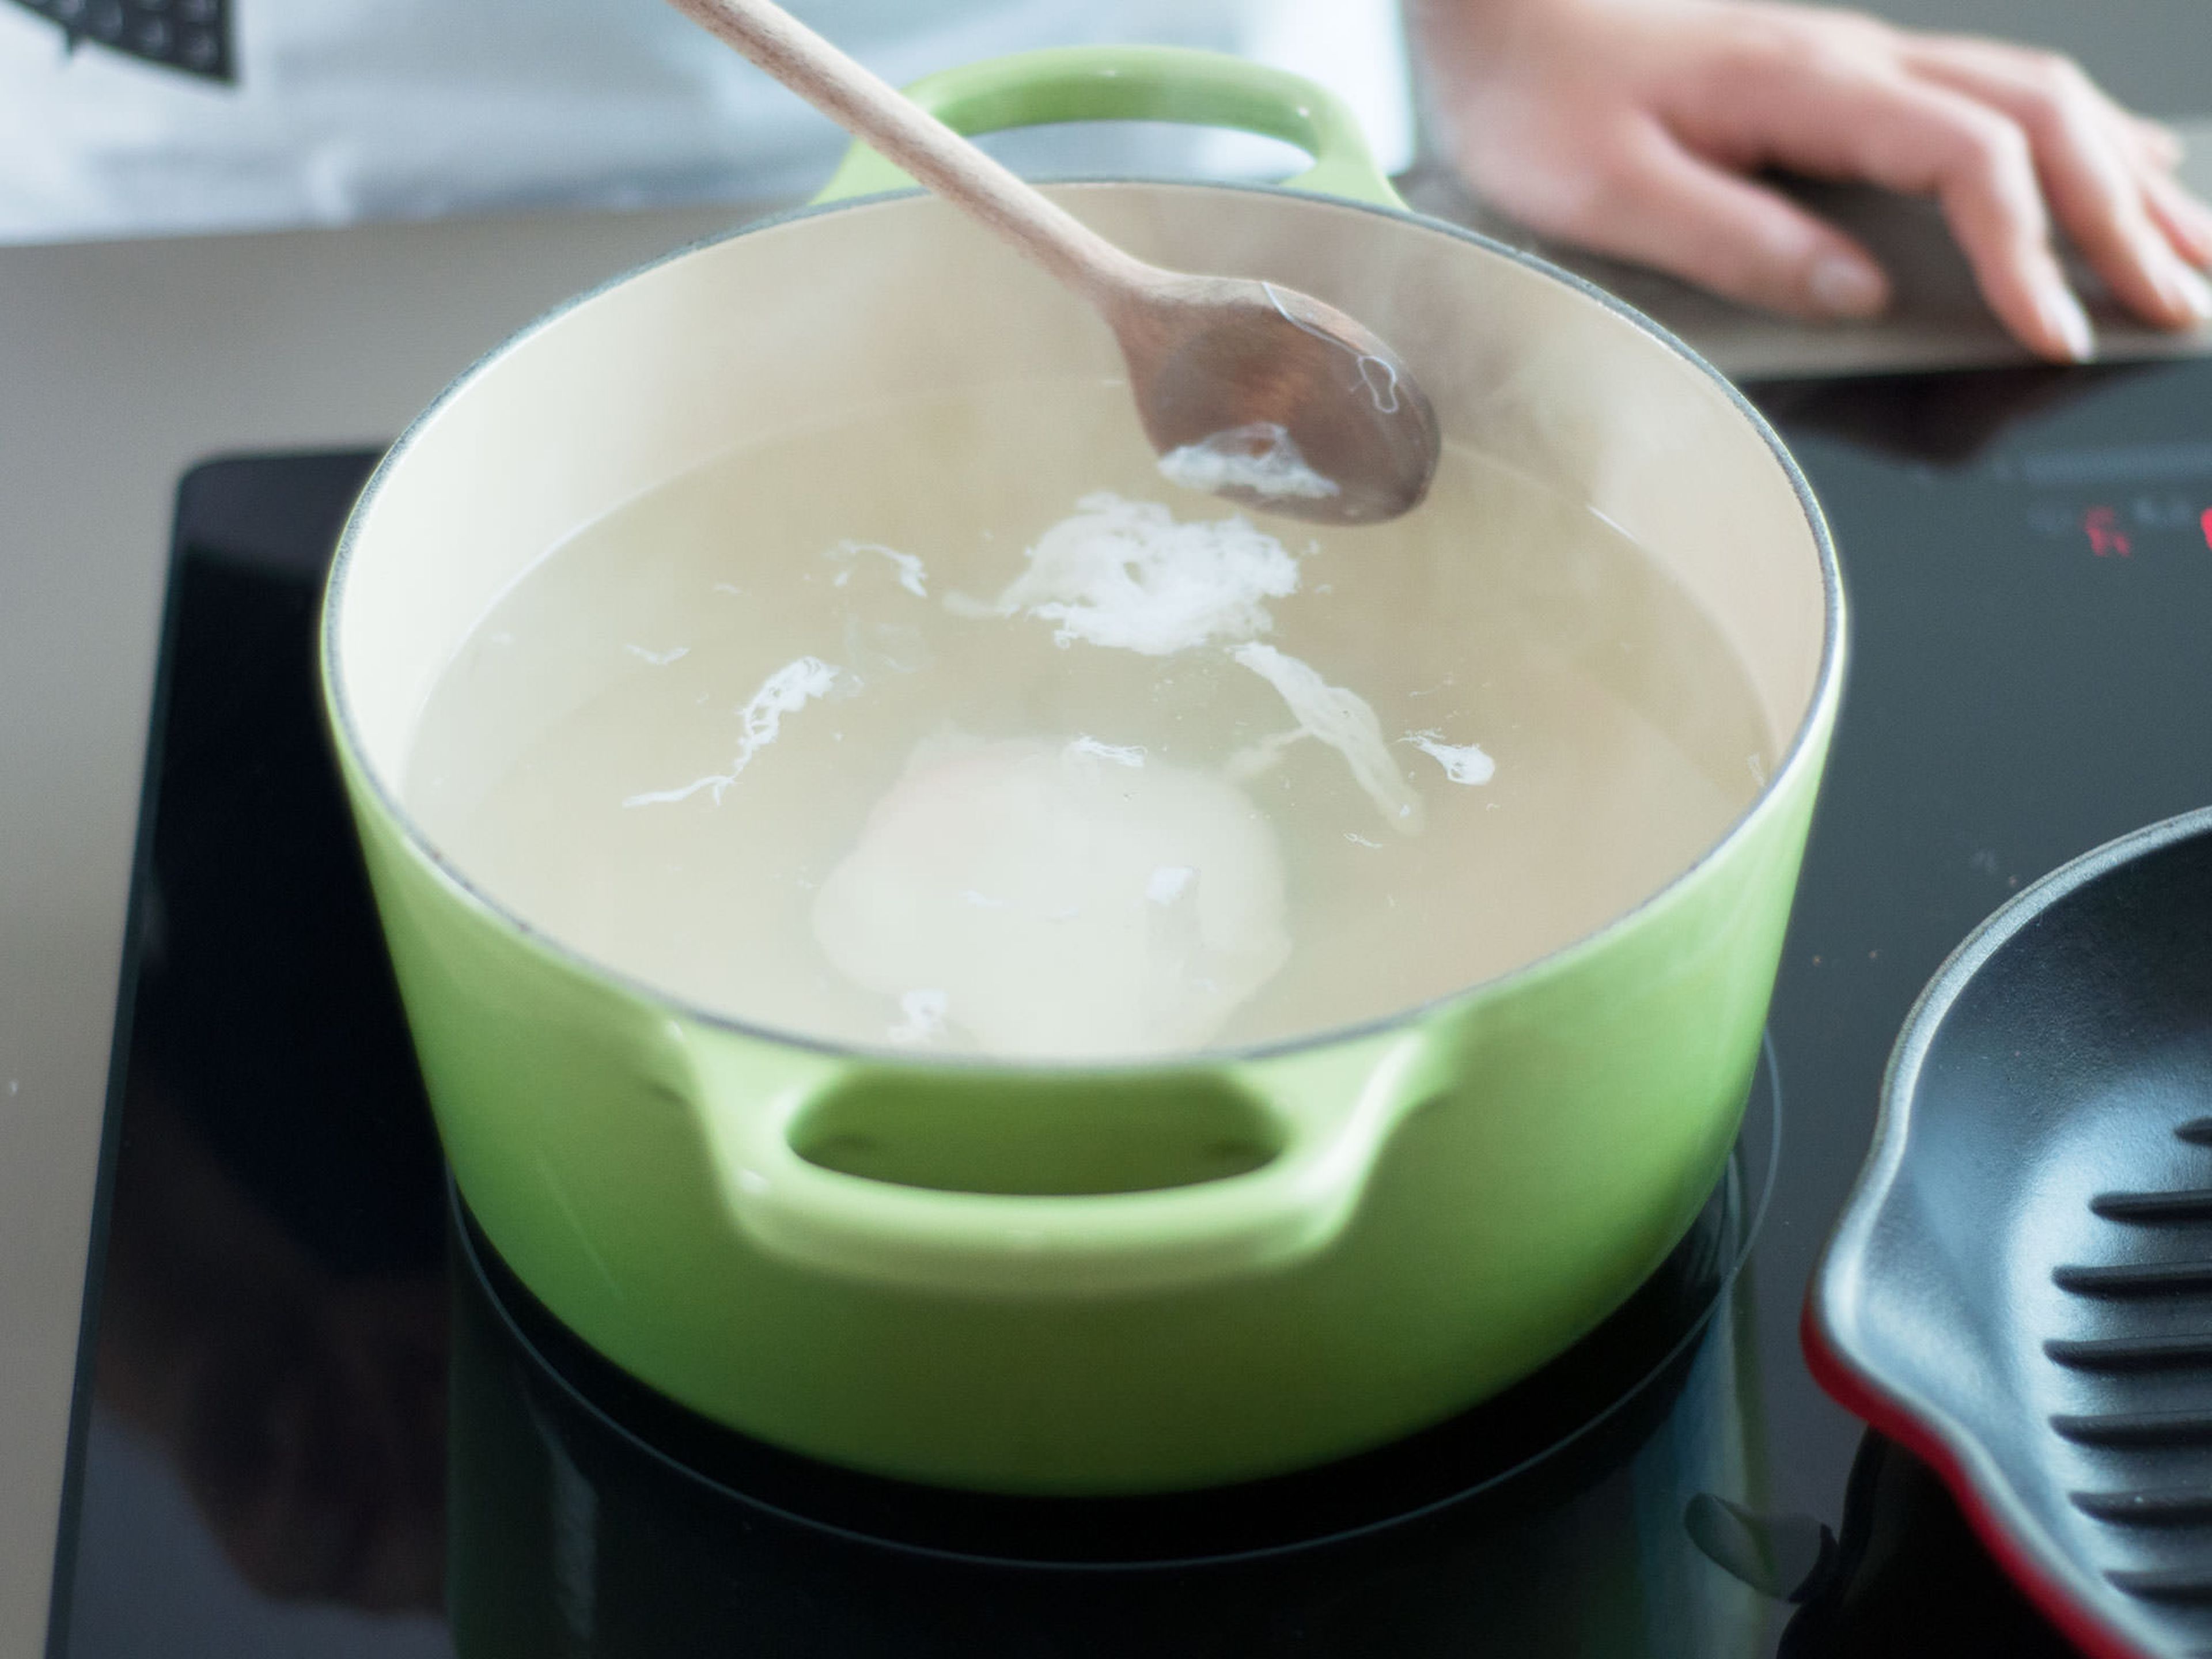 In a medium saucepan, bring salted water to a boil. Then reduce heat and add white vinegar. Crack eggs into separate cups. Stir water continuously with a cooking spoon to form a whirlpool. Then carefully pour eggs, one by one, into water. Cook eggs for 3 – 4 min, then use a slotted spoon to gently remove from water.